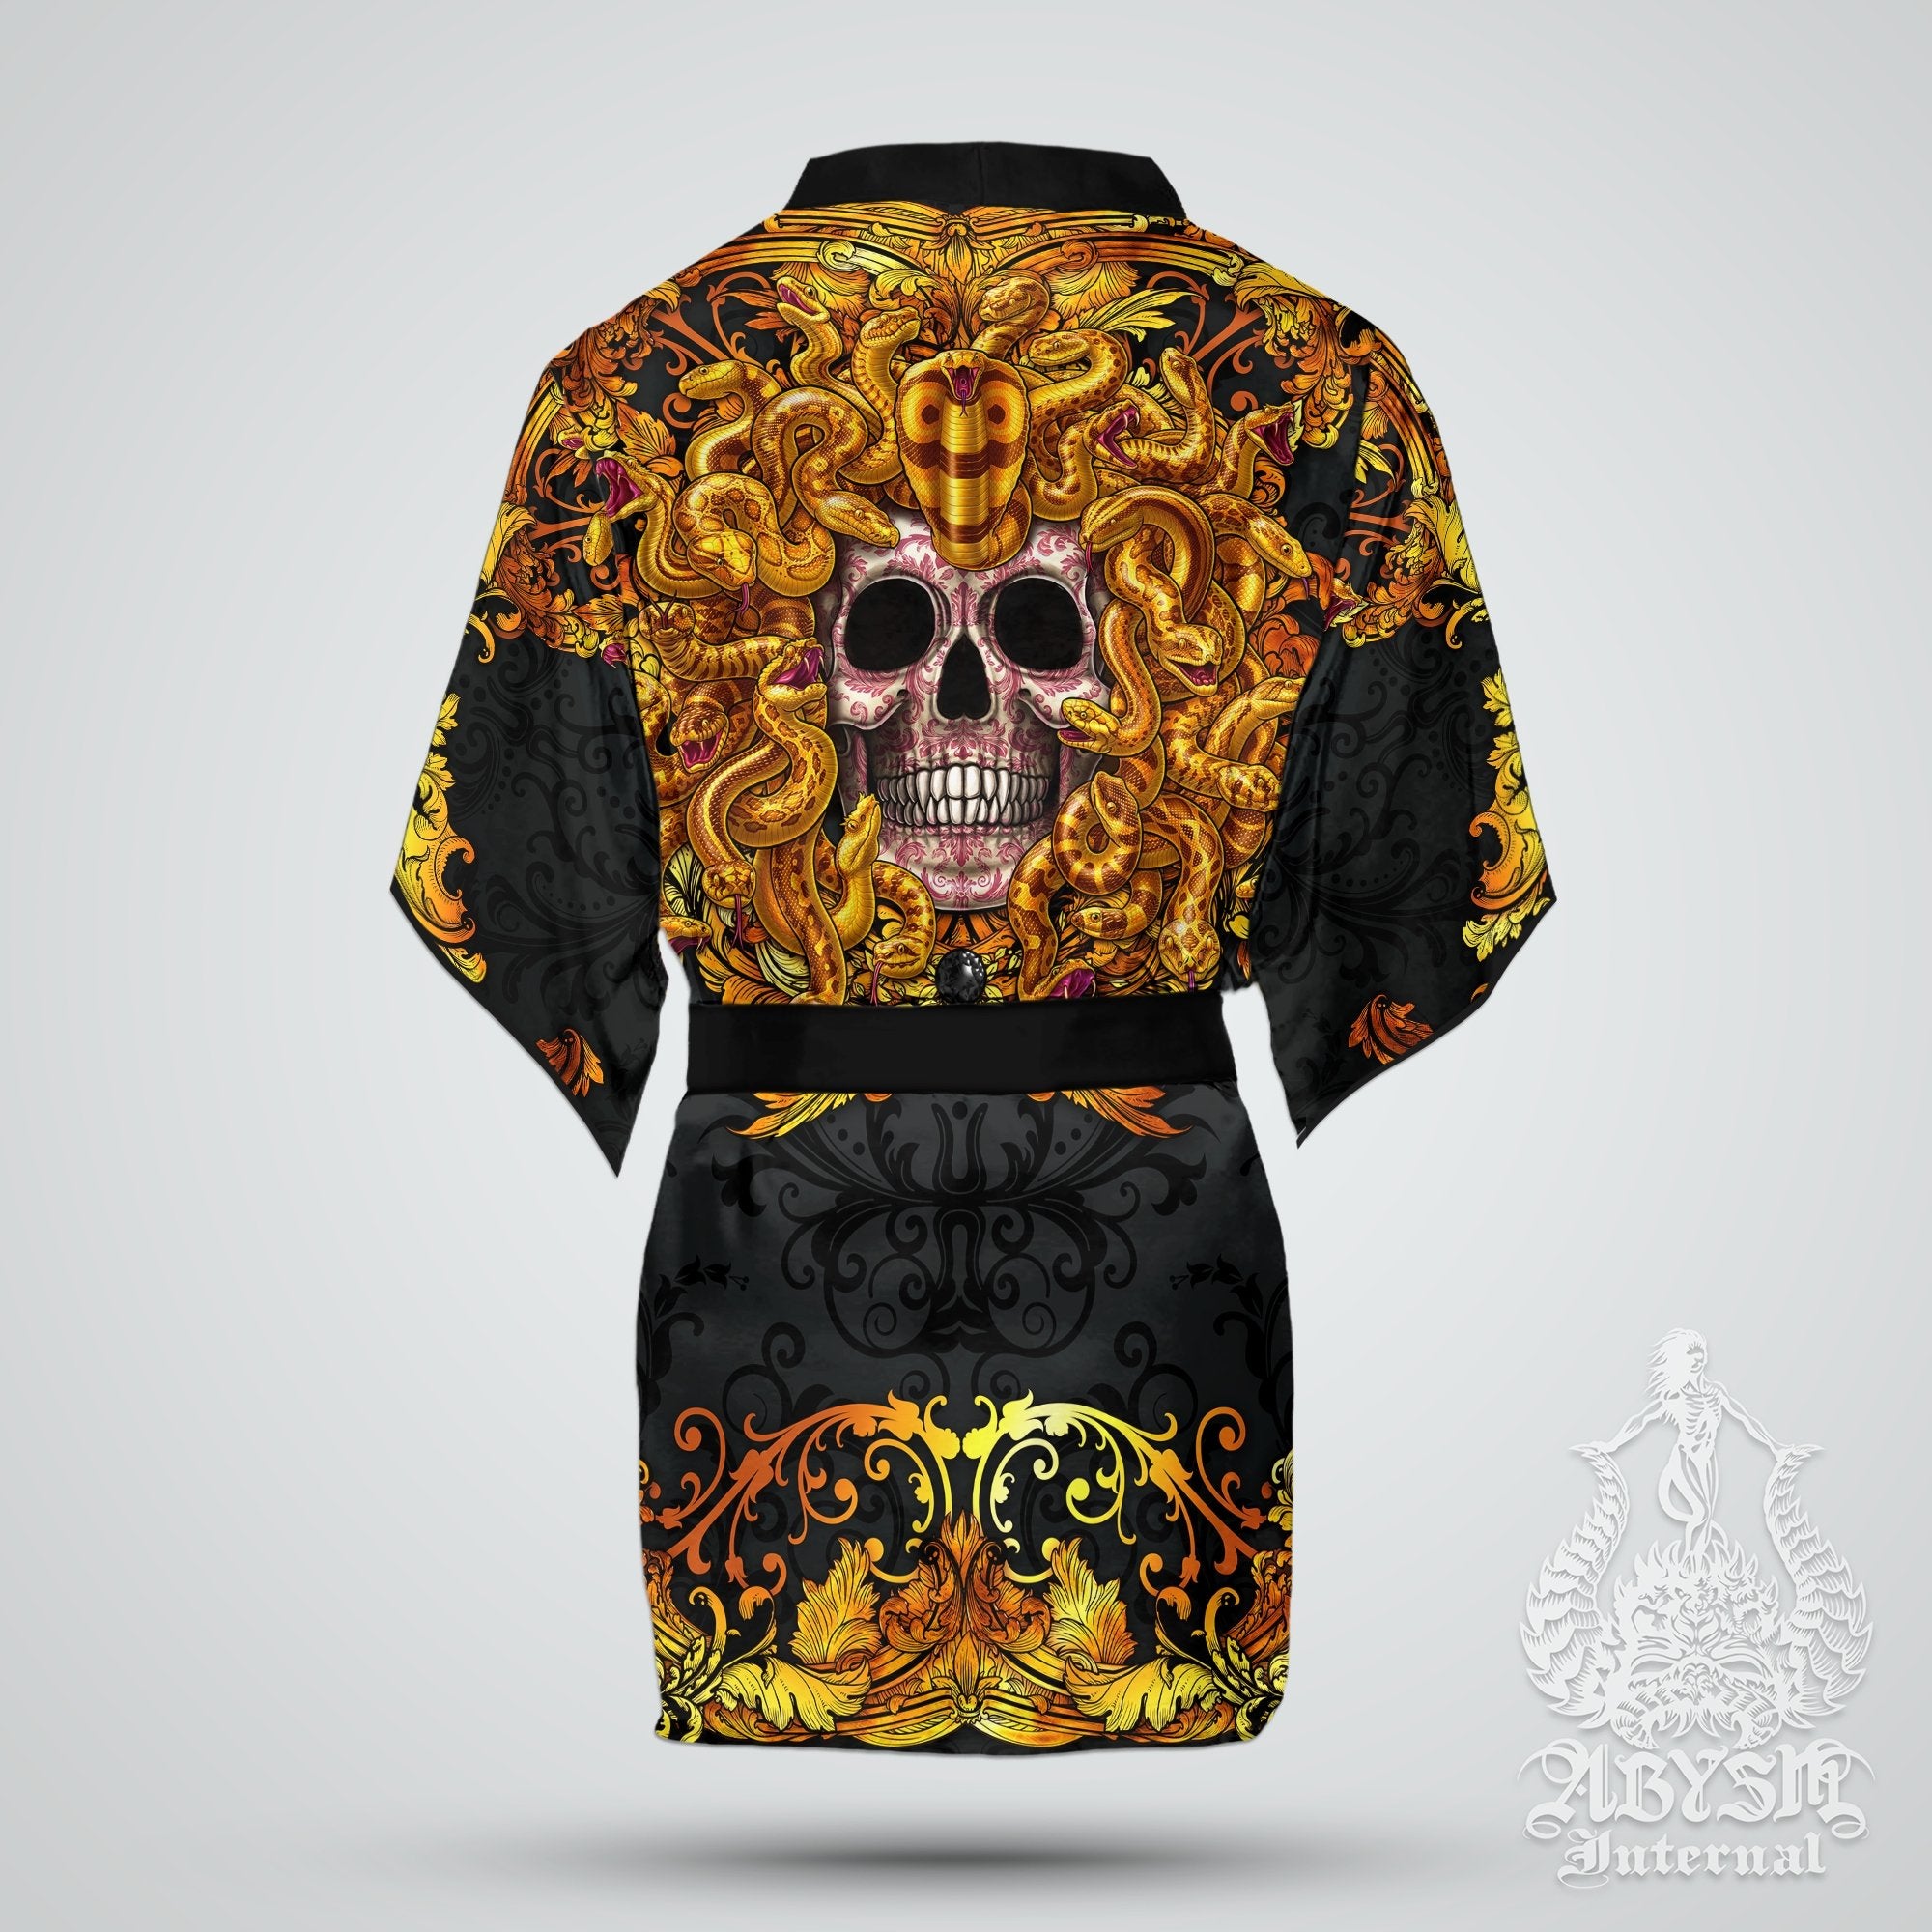 Medusa Skull Cover Up, Beach Outfit, Party Kimono, Summer Festival Robe, Indie and Alternative Clothing, Unisex - Gold - Abysm Internal